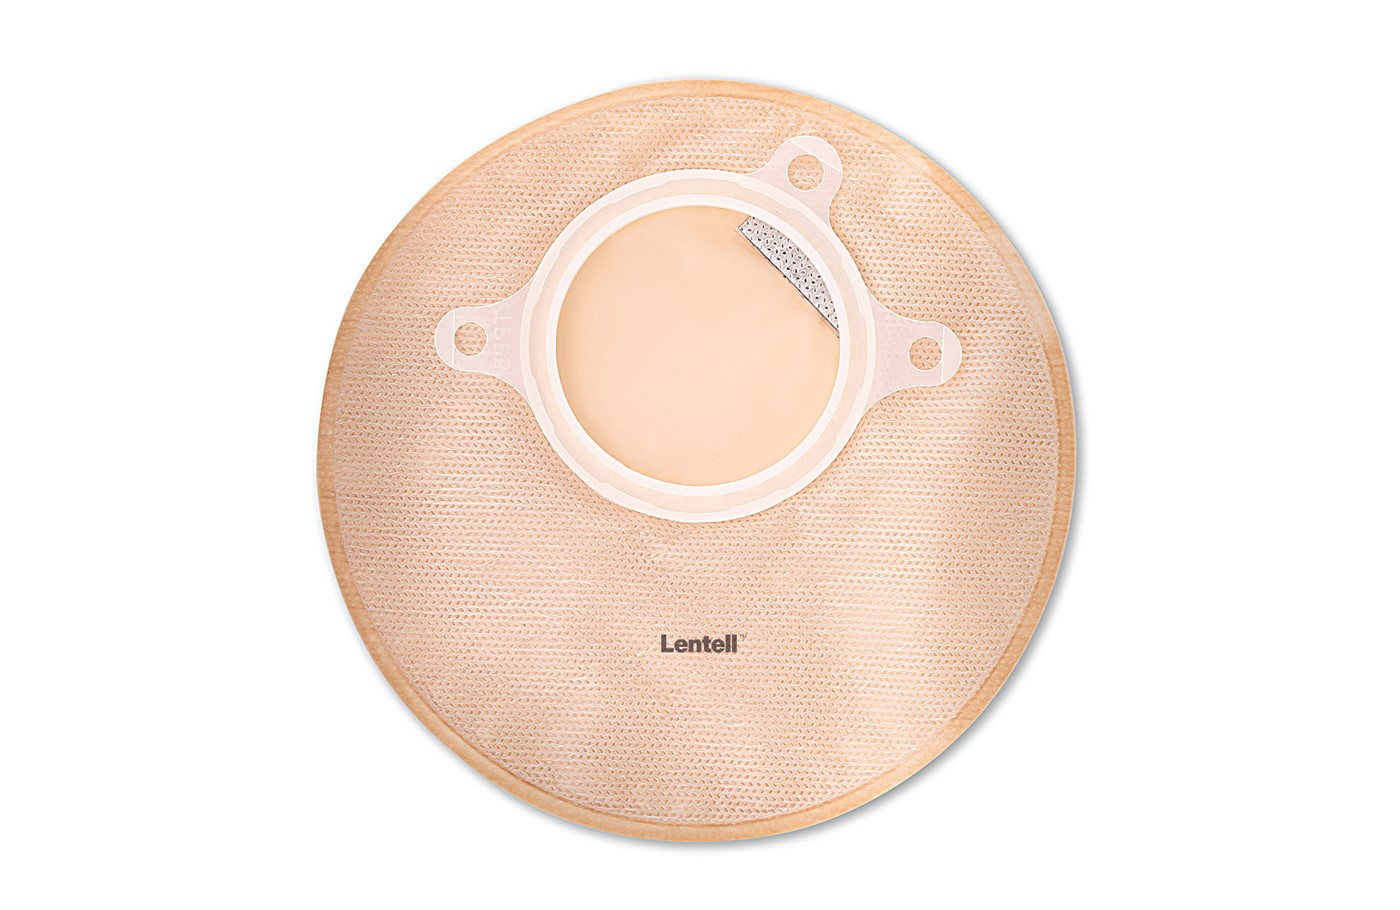 LENTELL COLOBAG II KIDS  PAEDIATRIC TWO-PIECE POUCHING SYSTEM